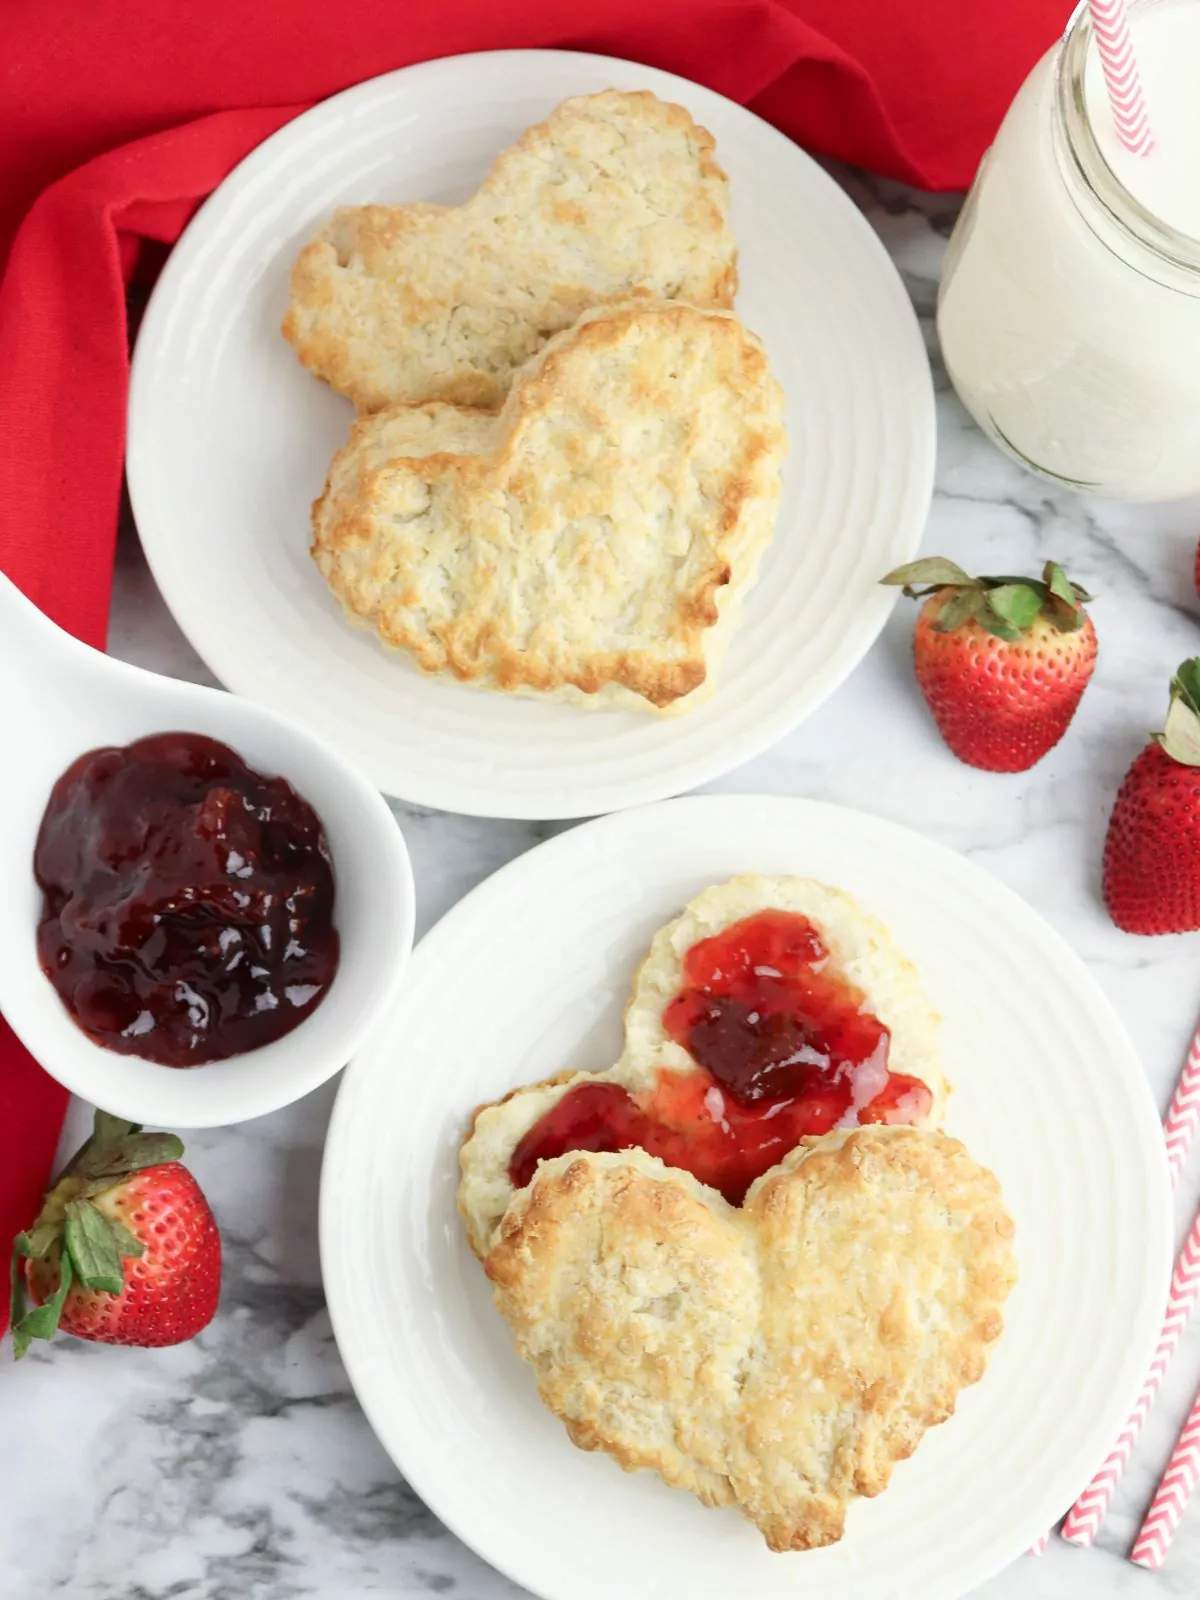 homemade heart shaped biscuits on plates with jam and strawberries.